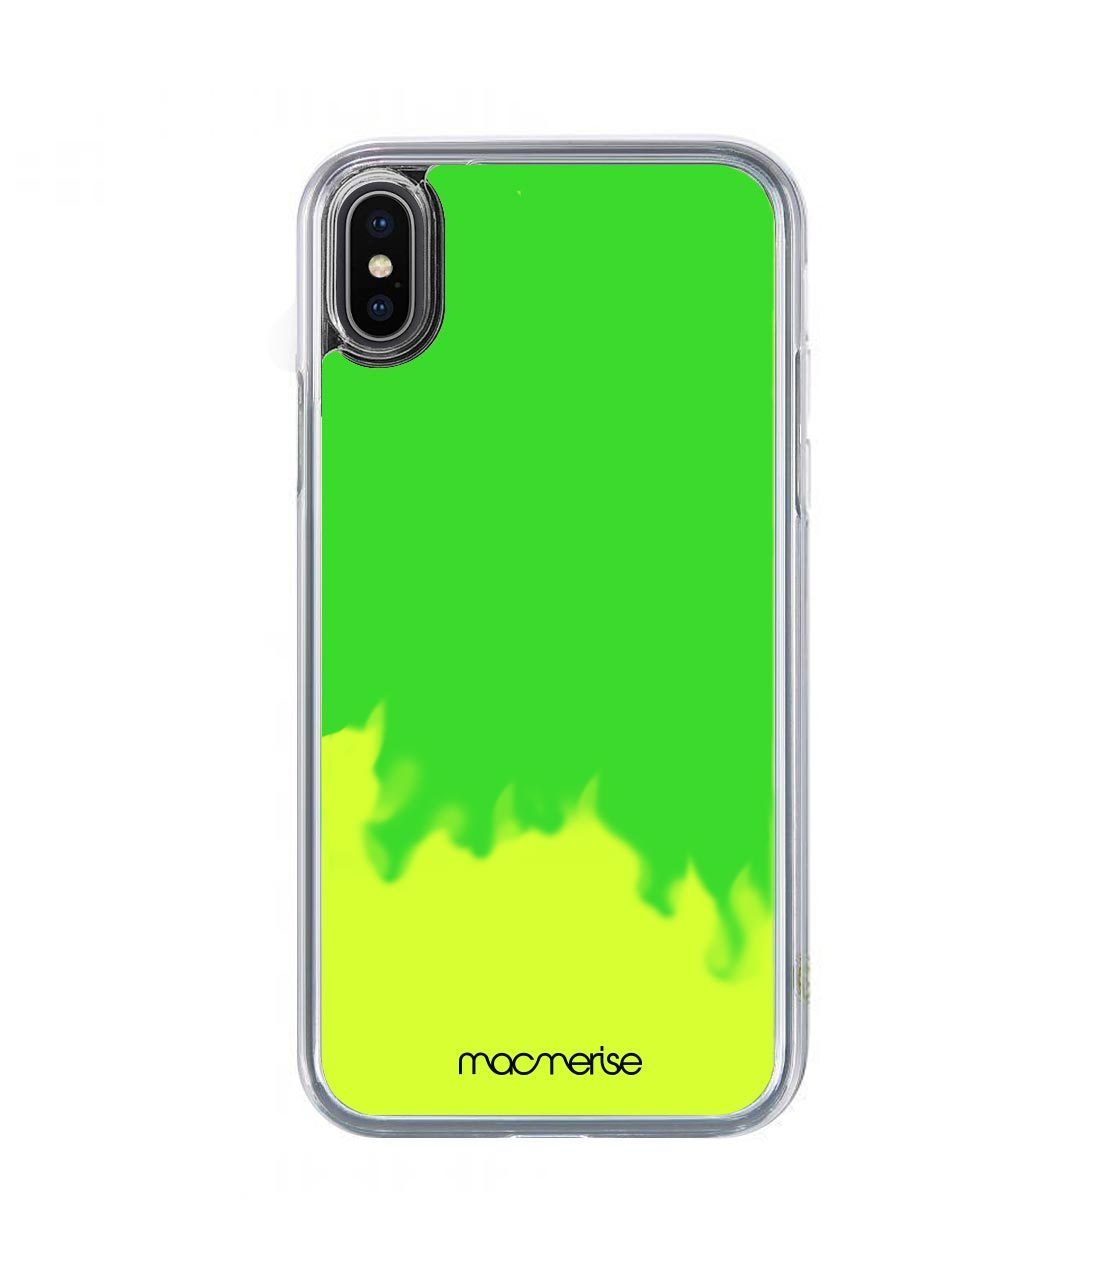 Neon Sand Green - Neon Sand Phone Case for iPhone XS